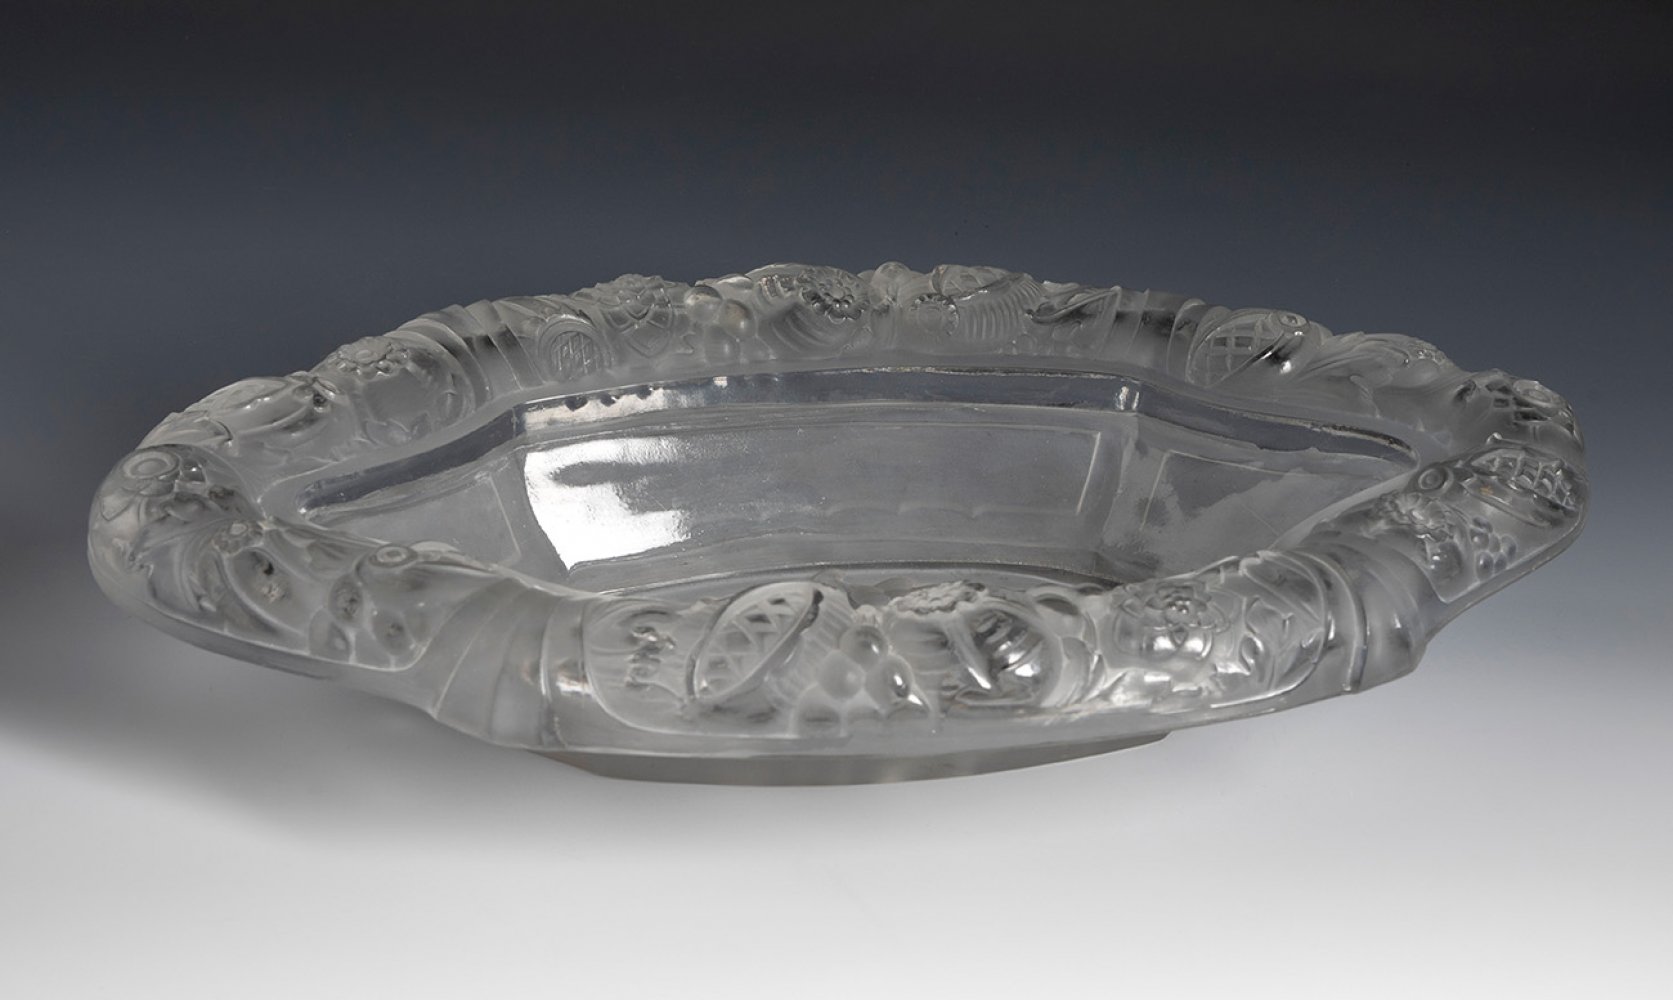 Oval centre. France, mid-20th century.Moulded glass.Wear and tear due to use and the passage of